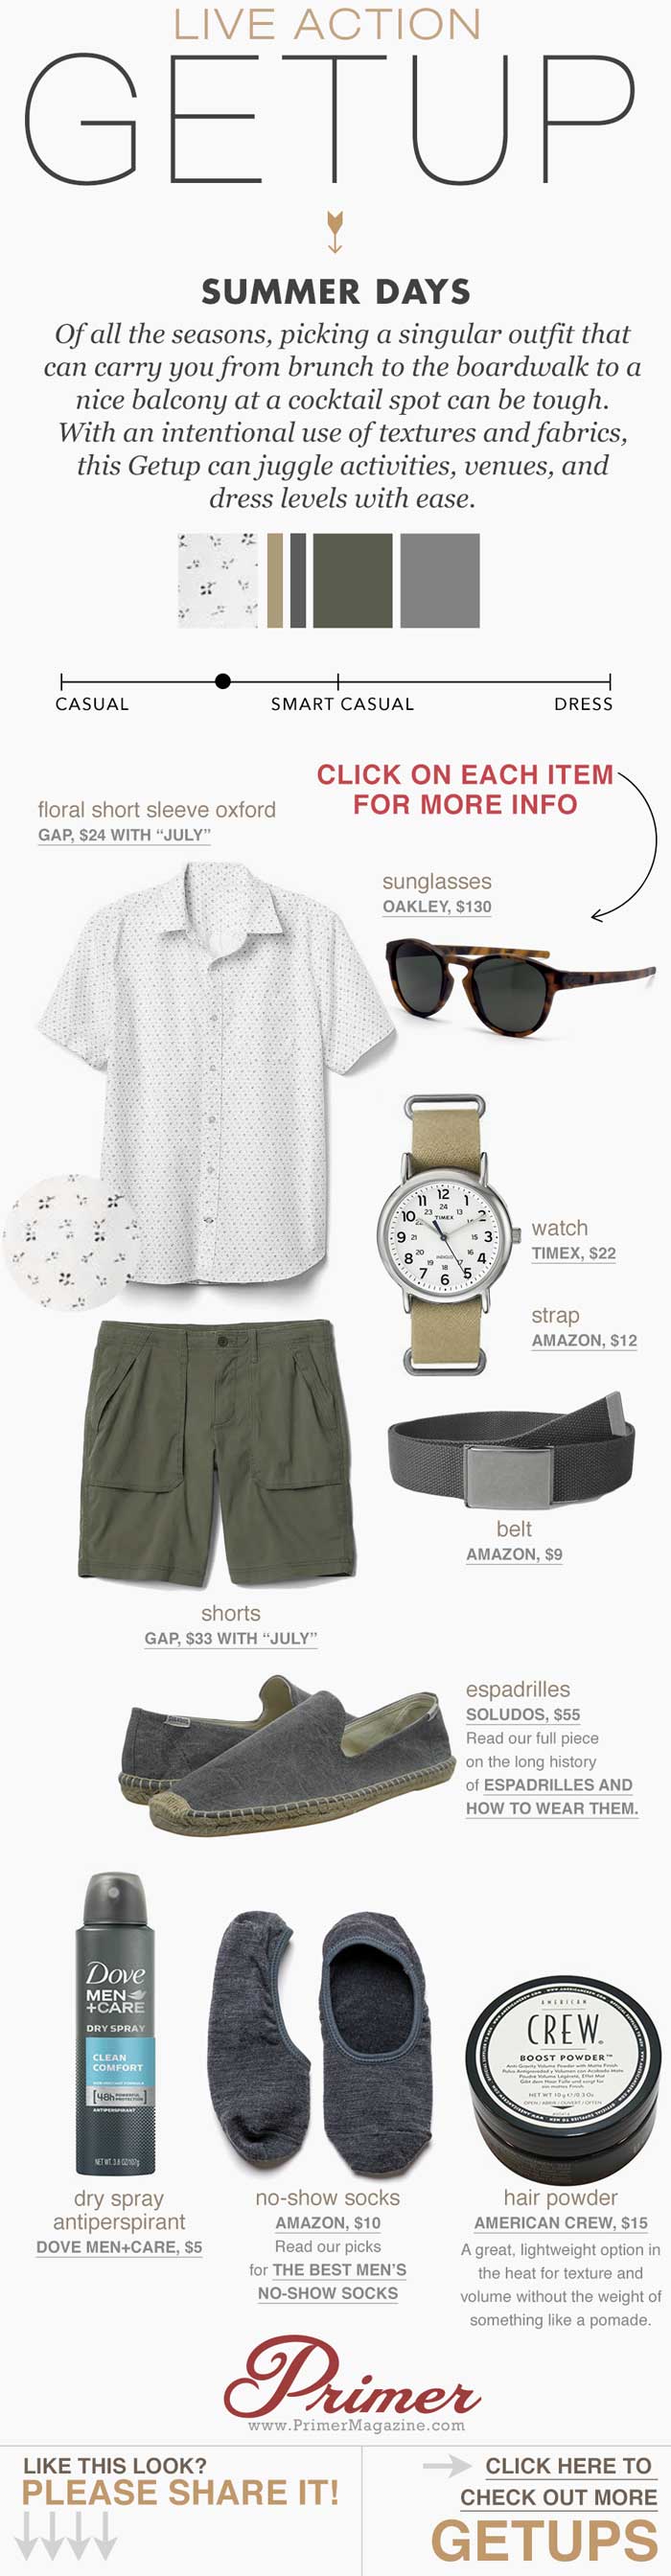 Men summer shorts outfit inspiration floral short sleeve oxford green hiking shorts gray espadrilles   The Getup by Primer